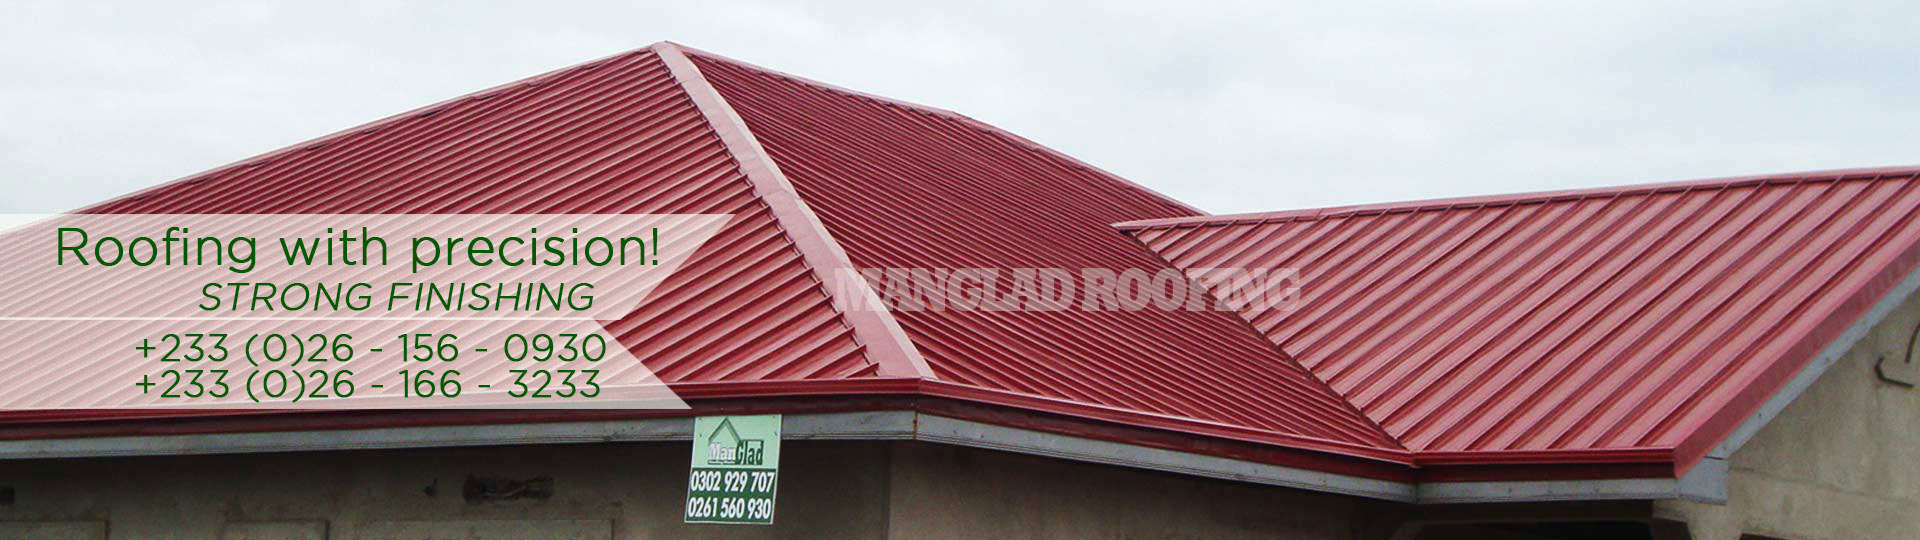 manglad_roofing_systems_ghana2